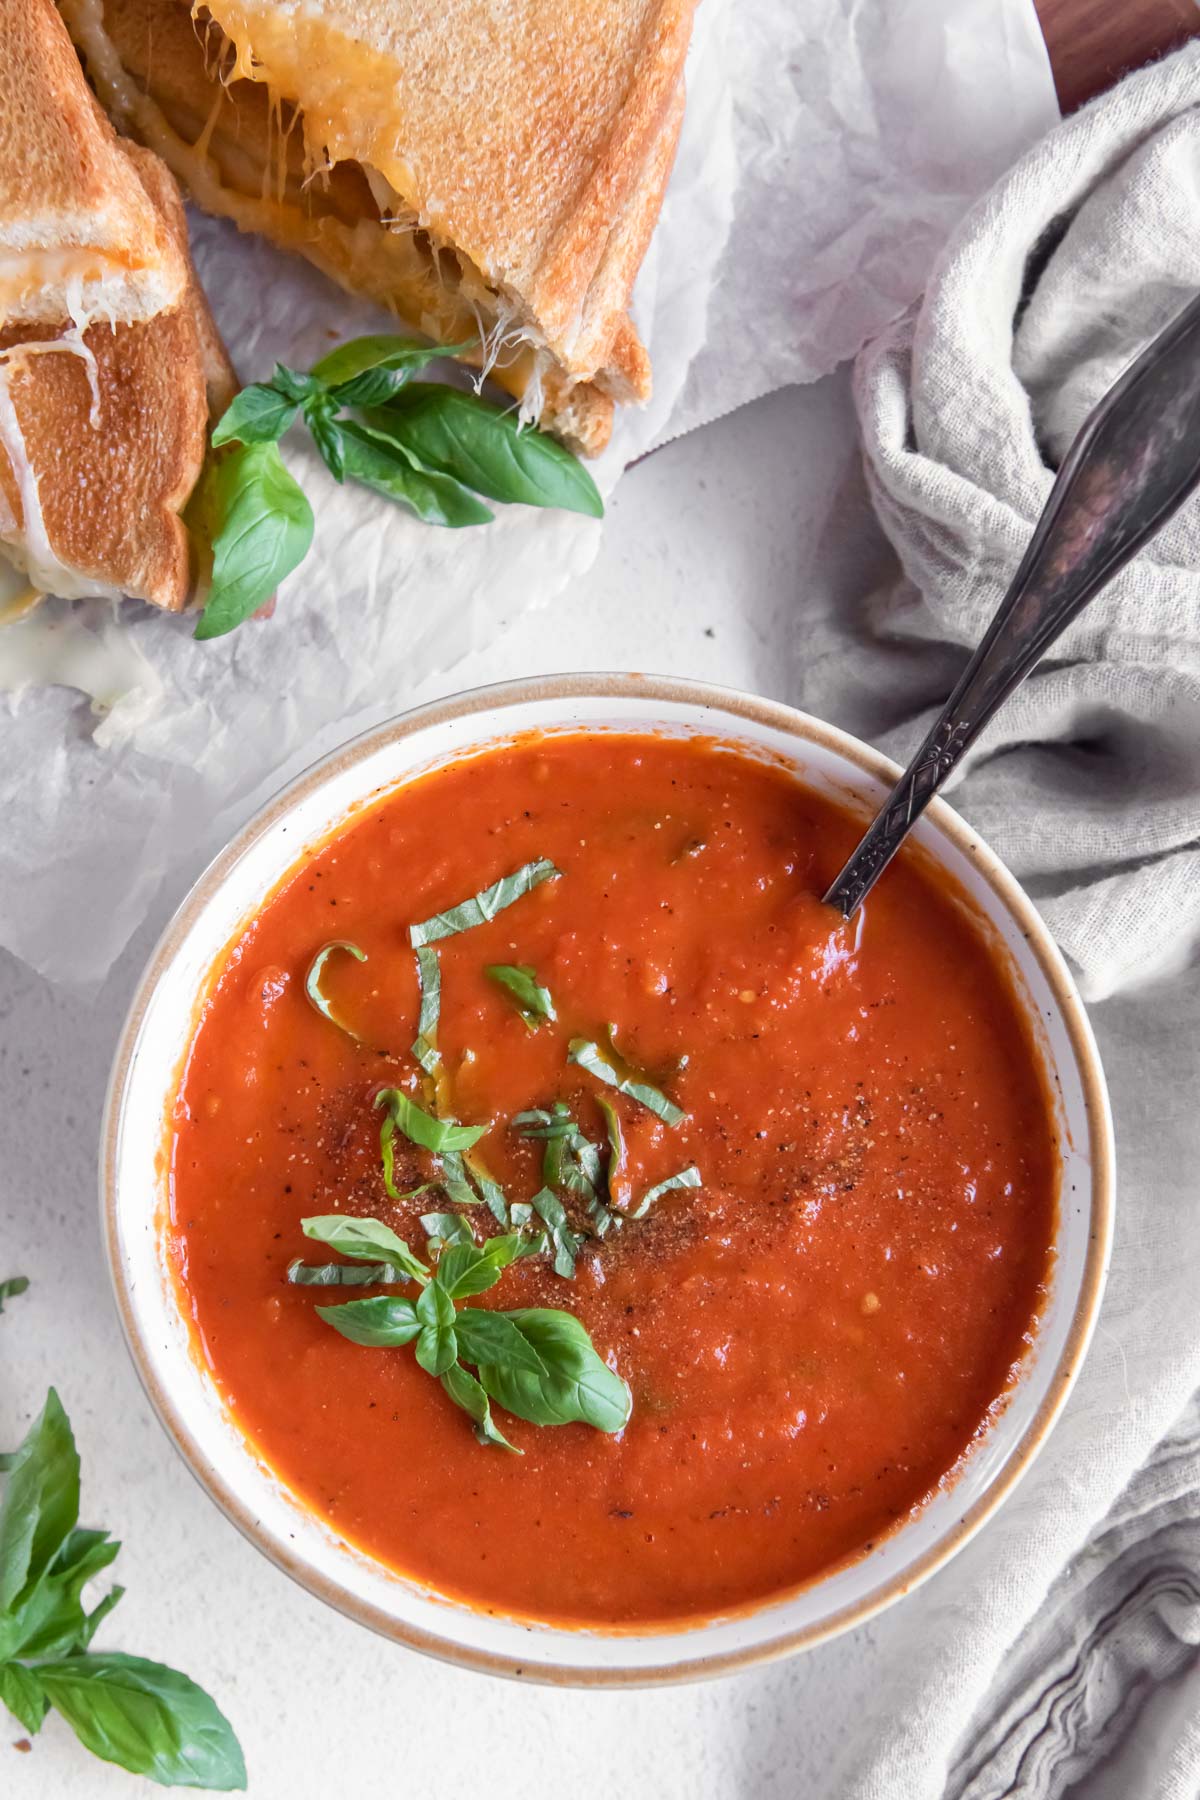 Tomato soup in a bowl garnished with fresh basil.